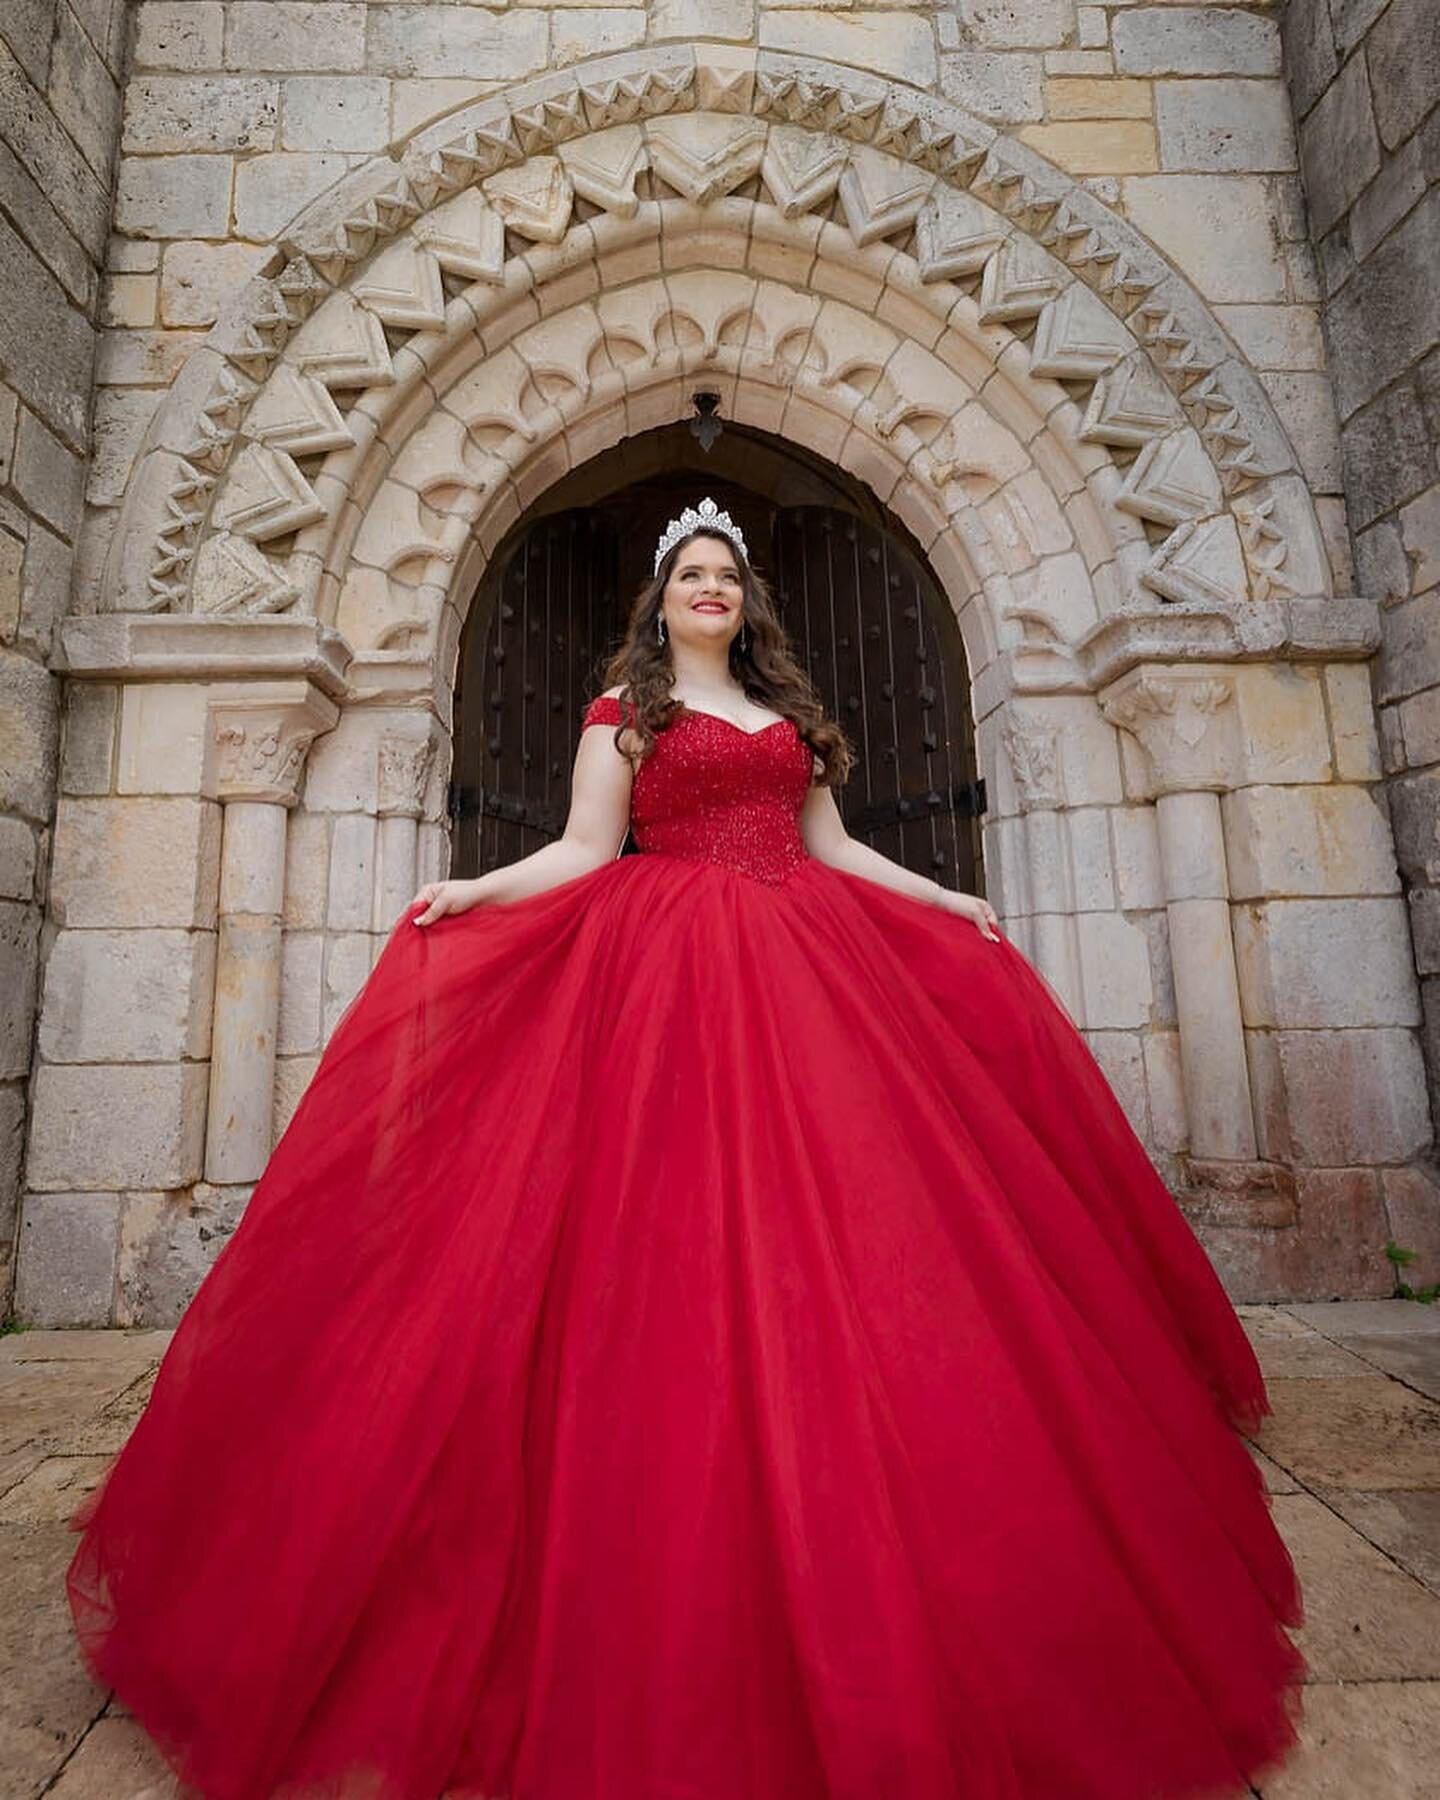 the top on this quince gown is just breathtaking!!❤️❤️
📸: @ineslynnphotography 
💋: @beautyculture_mua 
&bull;
&bull;
&bull;
&bull;

#quince#quinceañeramiami #quinceañera #quincedress #miami#miamidresses #miamidressrental#southflorida #dresses #go